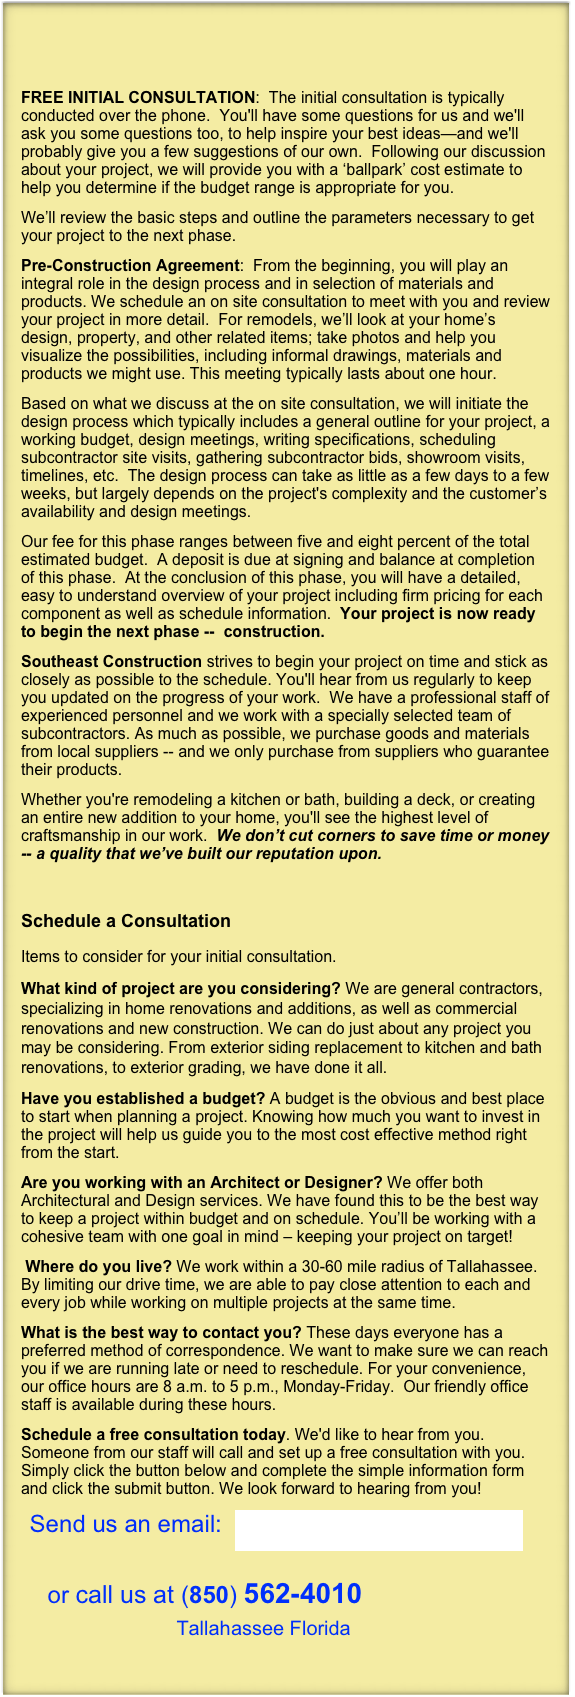 

FREE INITIAL CONSULTATION:  The initial consultation is typically conducted over the phone.  You'll have some questions for us and we'll ask you some questions too, to help inspire your best ideas—and we'll probably give you a few suggestions of our own.  Following our discussion about your project, we will provide you with a ‘ballpark’ cost estimate to help you determine if the budget range is appropriate for you. 
We’ll review the basic steps and outline the parameters necessary to get your project to the next phase.
Pre-Construction Agreement:  From the beginning, you will play an integral role in the design process and in selection of materials and products. We schedule an on site consultation to meet with you and review your project in more detail.  For remodels, we’ll look at your home’s design, property, and other related items; take photos and help you visualize the possibilities, including informal drawings, materials and products we might use. This meeting typically lasts about one hour.
Based on what we discuss at the on site consultation, we will initiate the design process which typically includes a general outline for your project, a working budget, design meetings, writing specifications, scheduling subcontractor site visits, gathering subcontractor bids, showroom visits,  timelines, etc.  The design process can take as little as a few days to a few weeks, but largely depends on the project's complexity and the customer’s availability and design meetings. 
Our fee for this phase ranges between five and eight percent of the total estimated budget.  A deposit is due at signing and balance at completion of this phase.  At the conclusion of this phase, you will have a detailed, easy to understand overview of your project including firm pricing for each component as well as schedule information.  Your project is now ready to begin the next phase --  construction.
Southeast Construction strives to begin your project on time and stick as closely as possible to the schedule. You'll hear from us regularly to keep you updated on the progress of your work.  We have a professional staff of experienced personnel and we work with a specially selected team of subcontractors. As much as possible, we purchase goods and materials from local suppliers -- and we only purchase from suppliers who guarantee their products.
Whether you're remodeling a kitchen or bath, building a deck, or creating an entire new addition to your home, you'll see the highest level of craftsmanship in our work.  We don’t cut corners to save time or money -- a quality that we’ve built our reputation upon.

 
Schedule a Consultation
Items to consider for your initial consultation.
What kind of project are you considering? We are general contractors, specializing in home renovations and additions, as well as commercial renovations and new construction. We can do just about any project you may be considering. From exterior siding replacement to kitchen and bath renovations, to exterior grading, we have done it all.
Have you established a budget? A budget is the obvious and best place to start when planning a project. Knowing how much you want to invest in the project will help us guide you to the most cost effective method right from the start. 
Are you working with an Architect or Designer? We offer both Architectural and Design services. We have found this to be the best way to keep a project within budget and on schedule. You’ll be working with a cohesive team with one goal in mind – keeping your project on target!
 Where do you live? We work within a 30-60 mile radius of Tallahassee. By limiting our drive time, we are able to pay close attention to each and every job while working on multiple projects at the same time.
What is the best way to contact you? These days everyone has a preferred method of correspondence. We want to make sure we can reach you if we are running late or need to reschedule. For your convenience, our office hours are 8 a.m. to 5 p.m., Monday-Friday.  Our friendly office staff is available during these hours.
Schedule a free consultation today. We'd like to hear from you. Someone from our staff will call and set up a free consultation with you. Simply click the button below and complete the simple information form and click the submit button. We look forward to hearing from you!
  Send us an email:  SoutheastTLH@gmail.com  

    or call us at (850) 562-4010  
                    Tallahassee Florida
